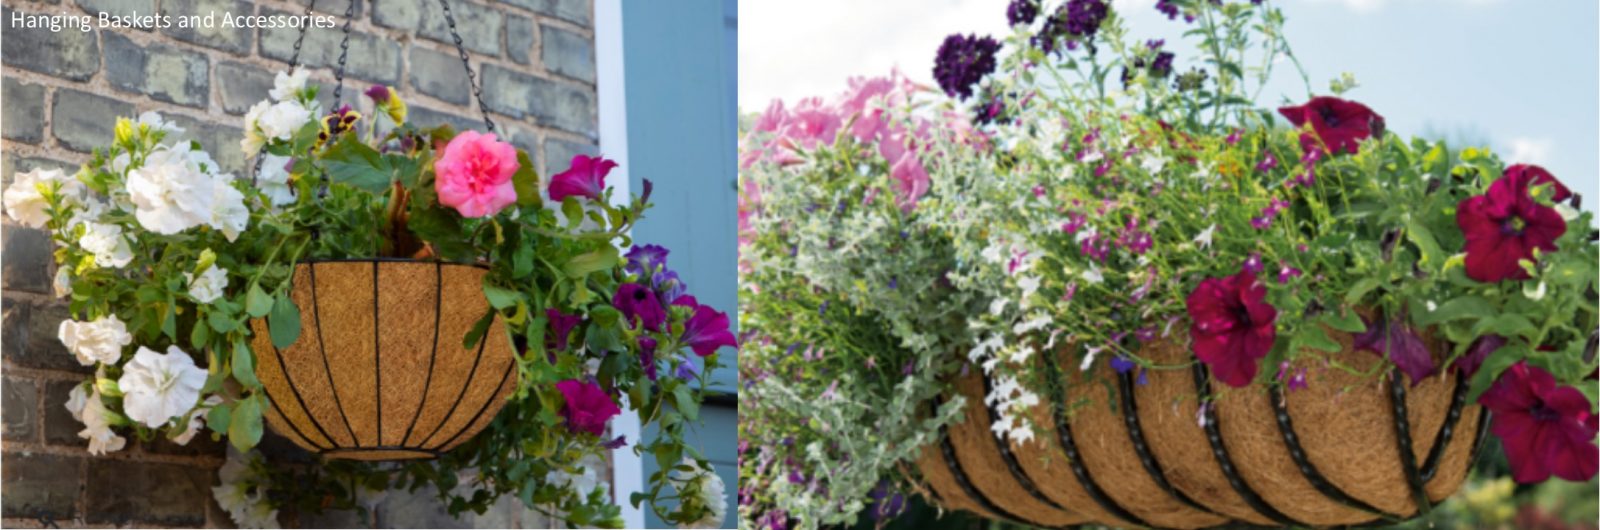 HANGING BASKETS & ACCESSORIES